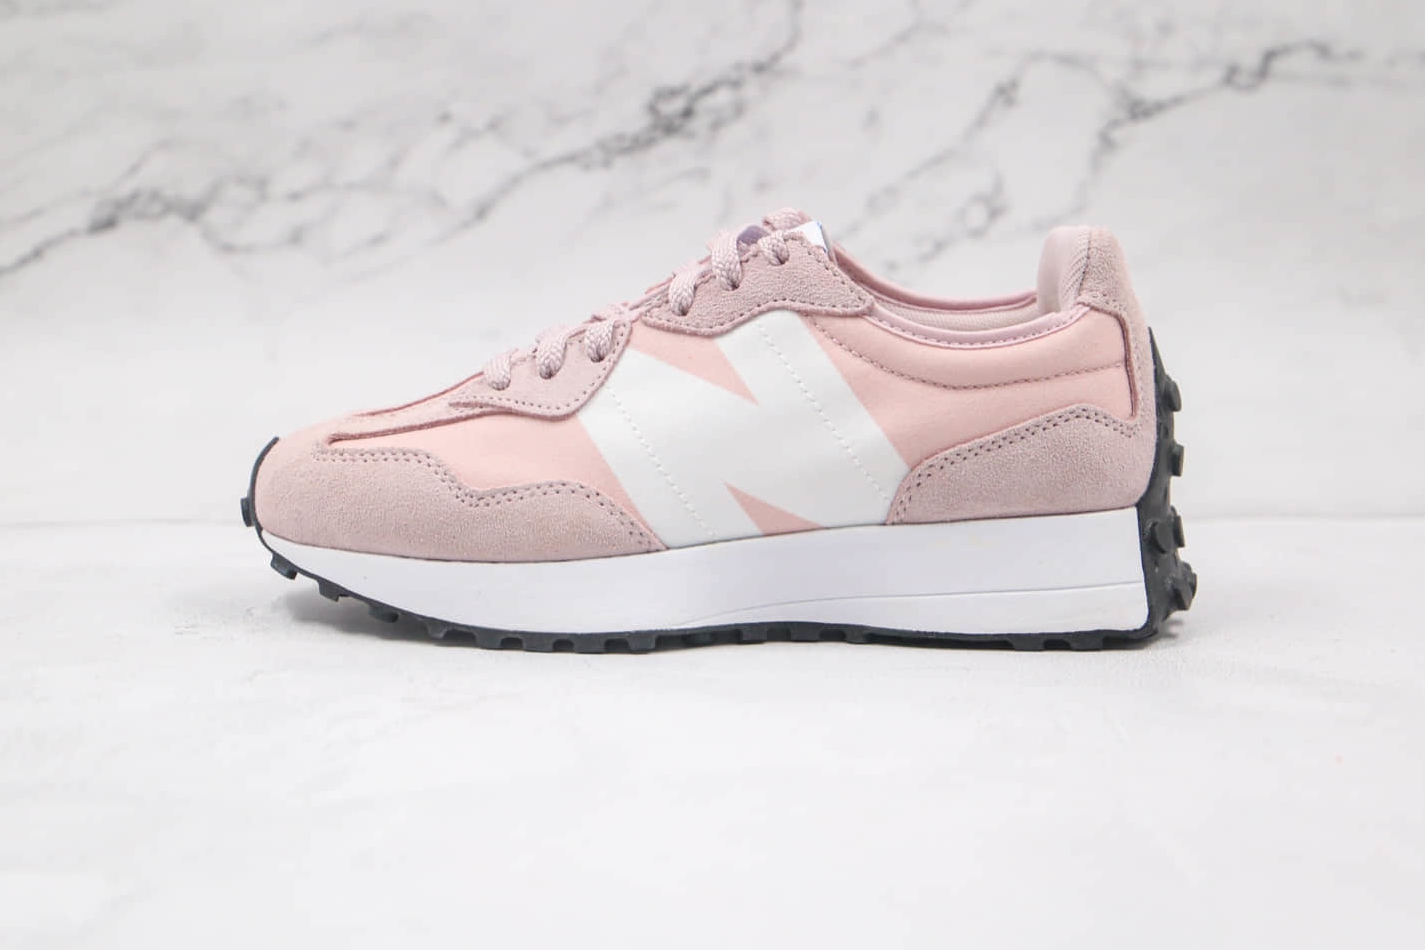 New Balance 327 Pink White YS327CKC - Trendy Sneakers for Style and Comfort